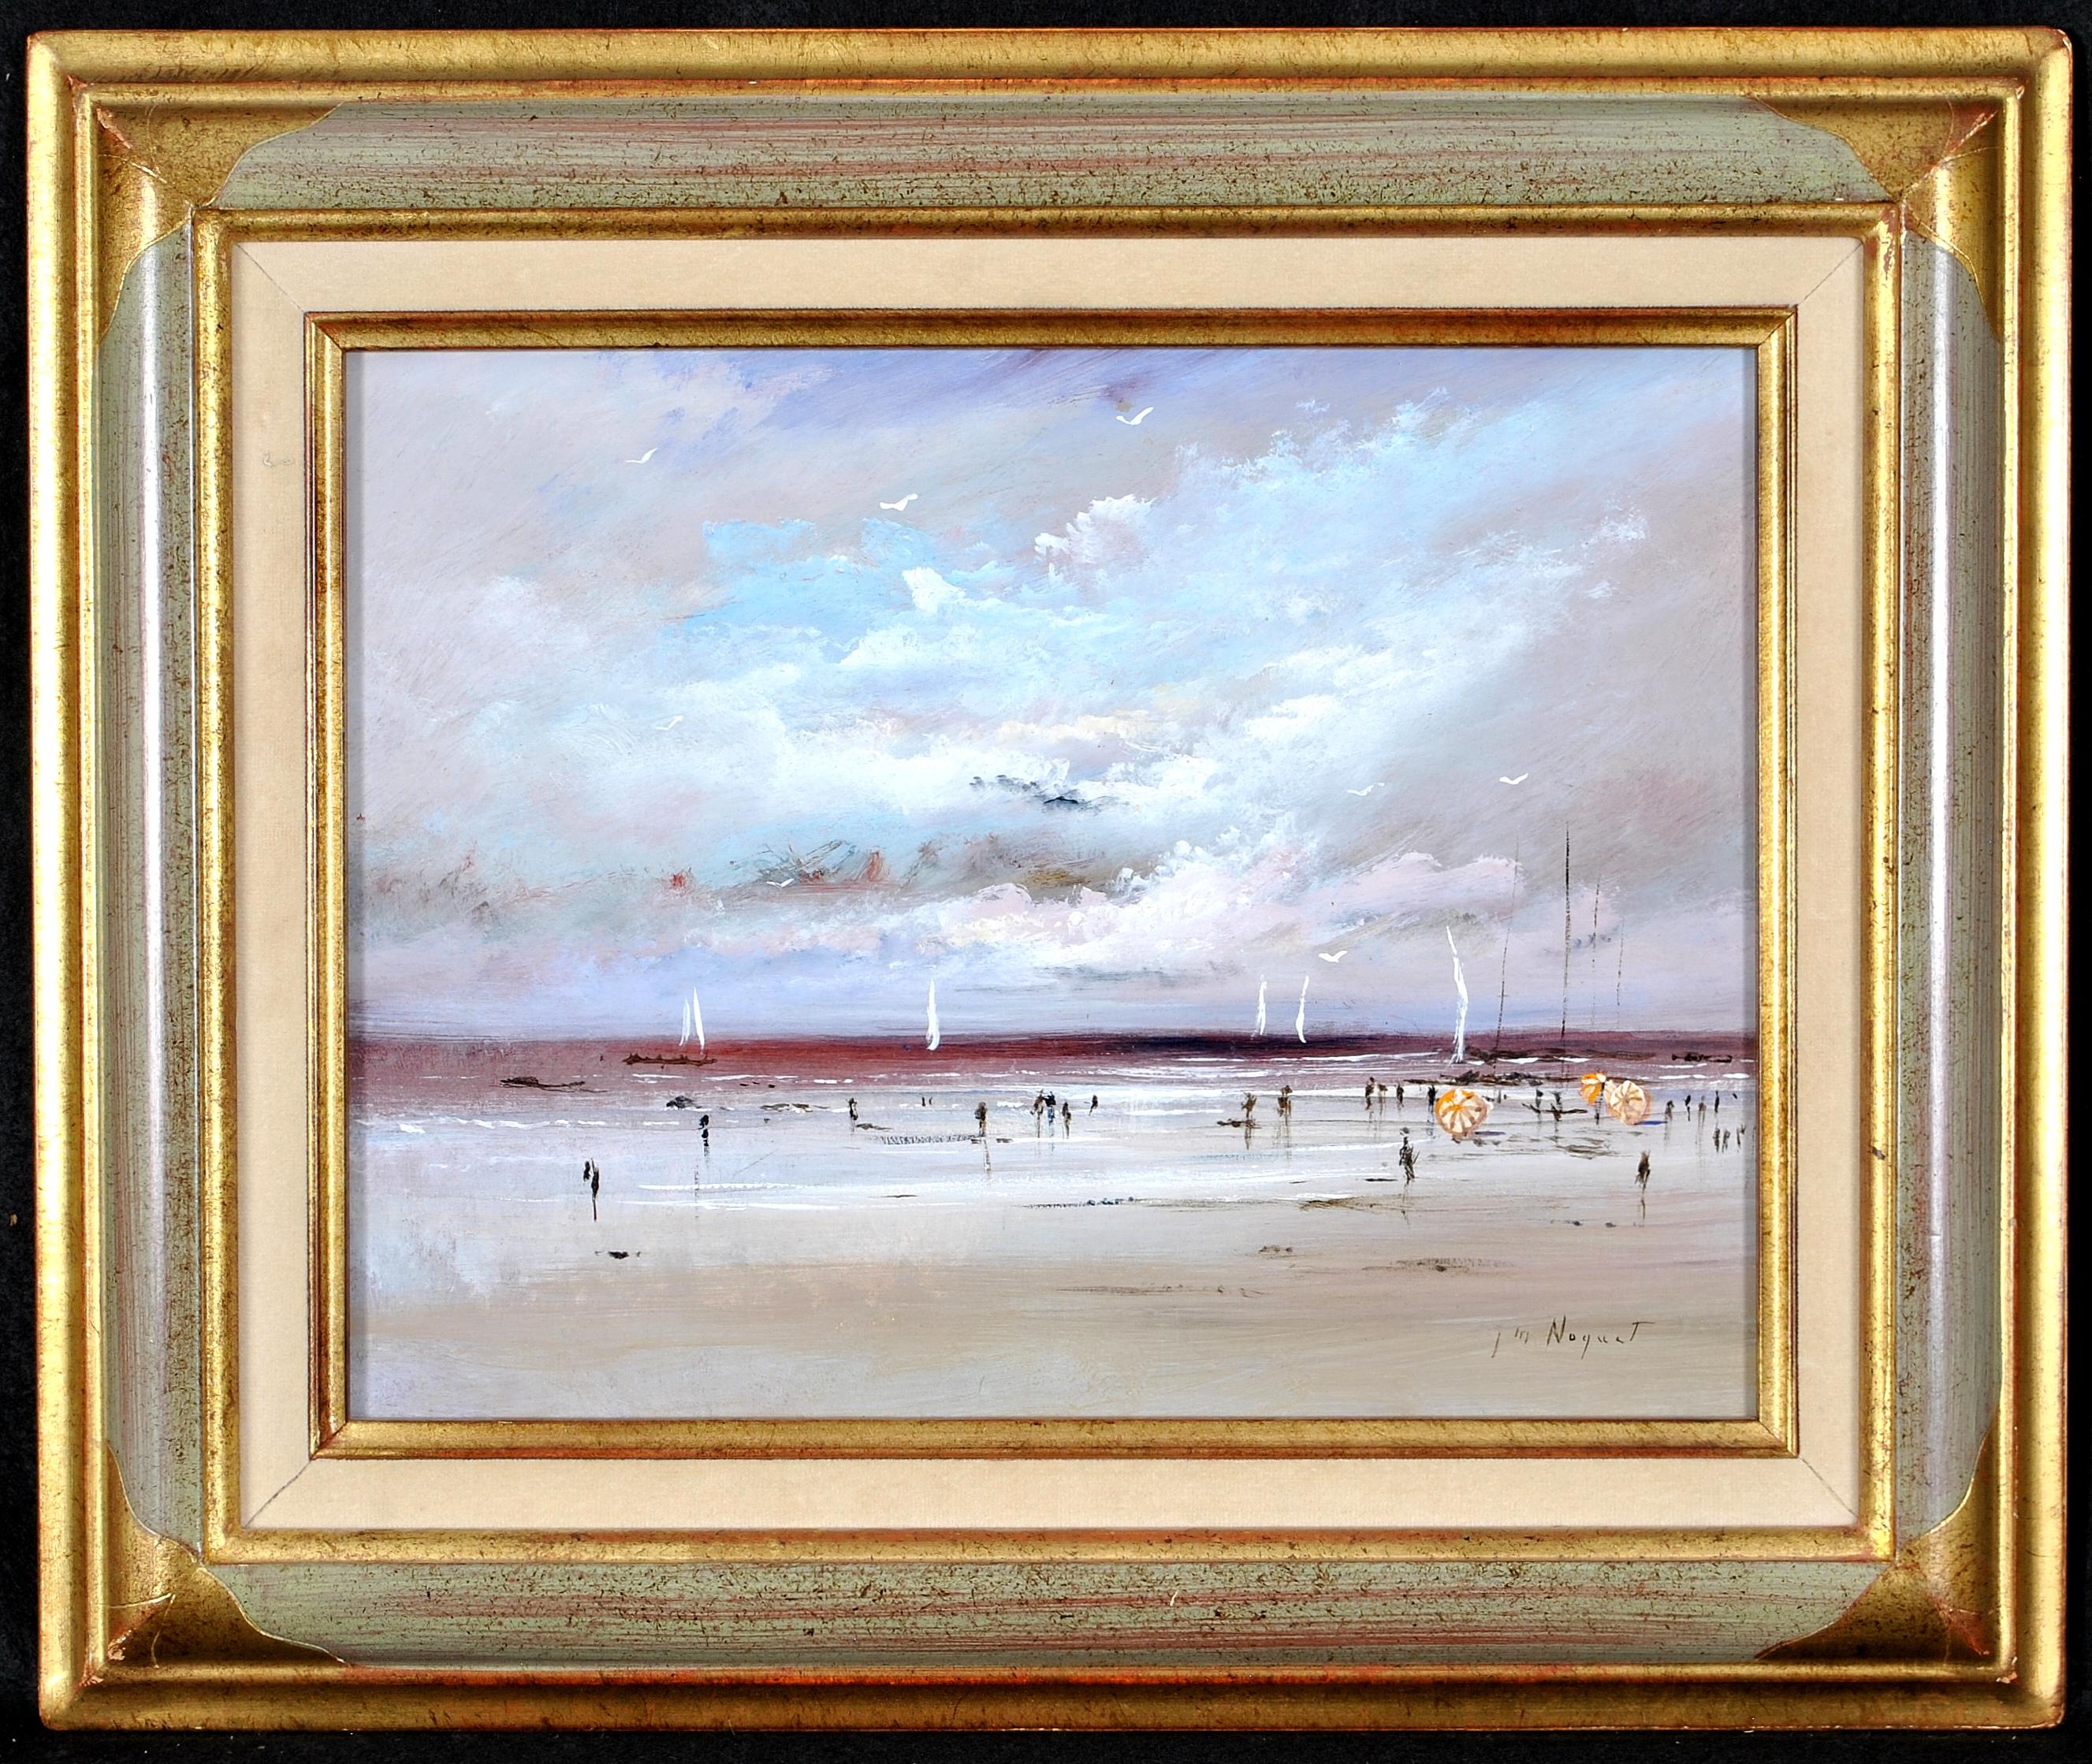 J. Nocquet Landscape Painting - Figures on the Beach - Mid 20th Century French Impressionist Seaside Painting